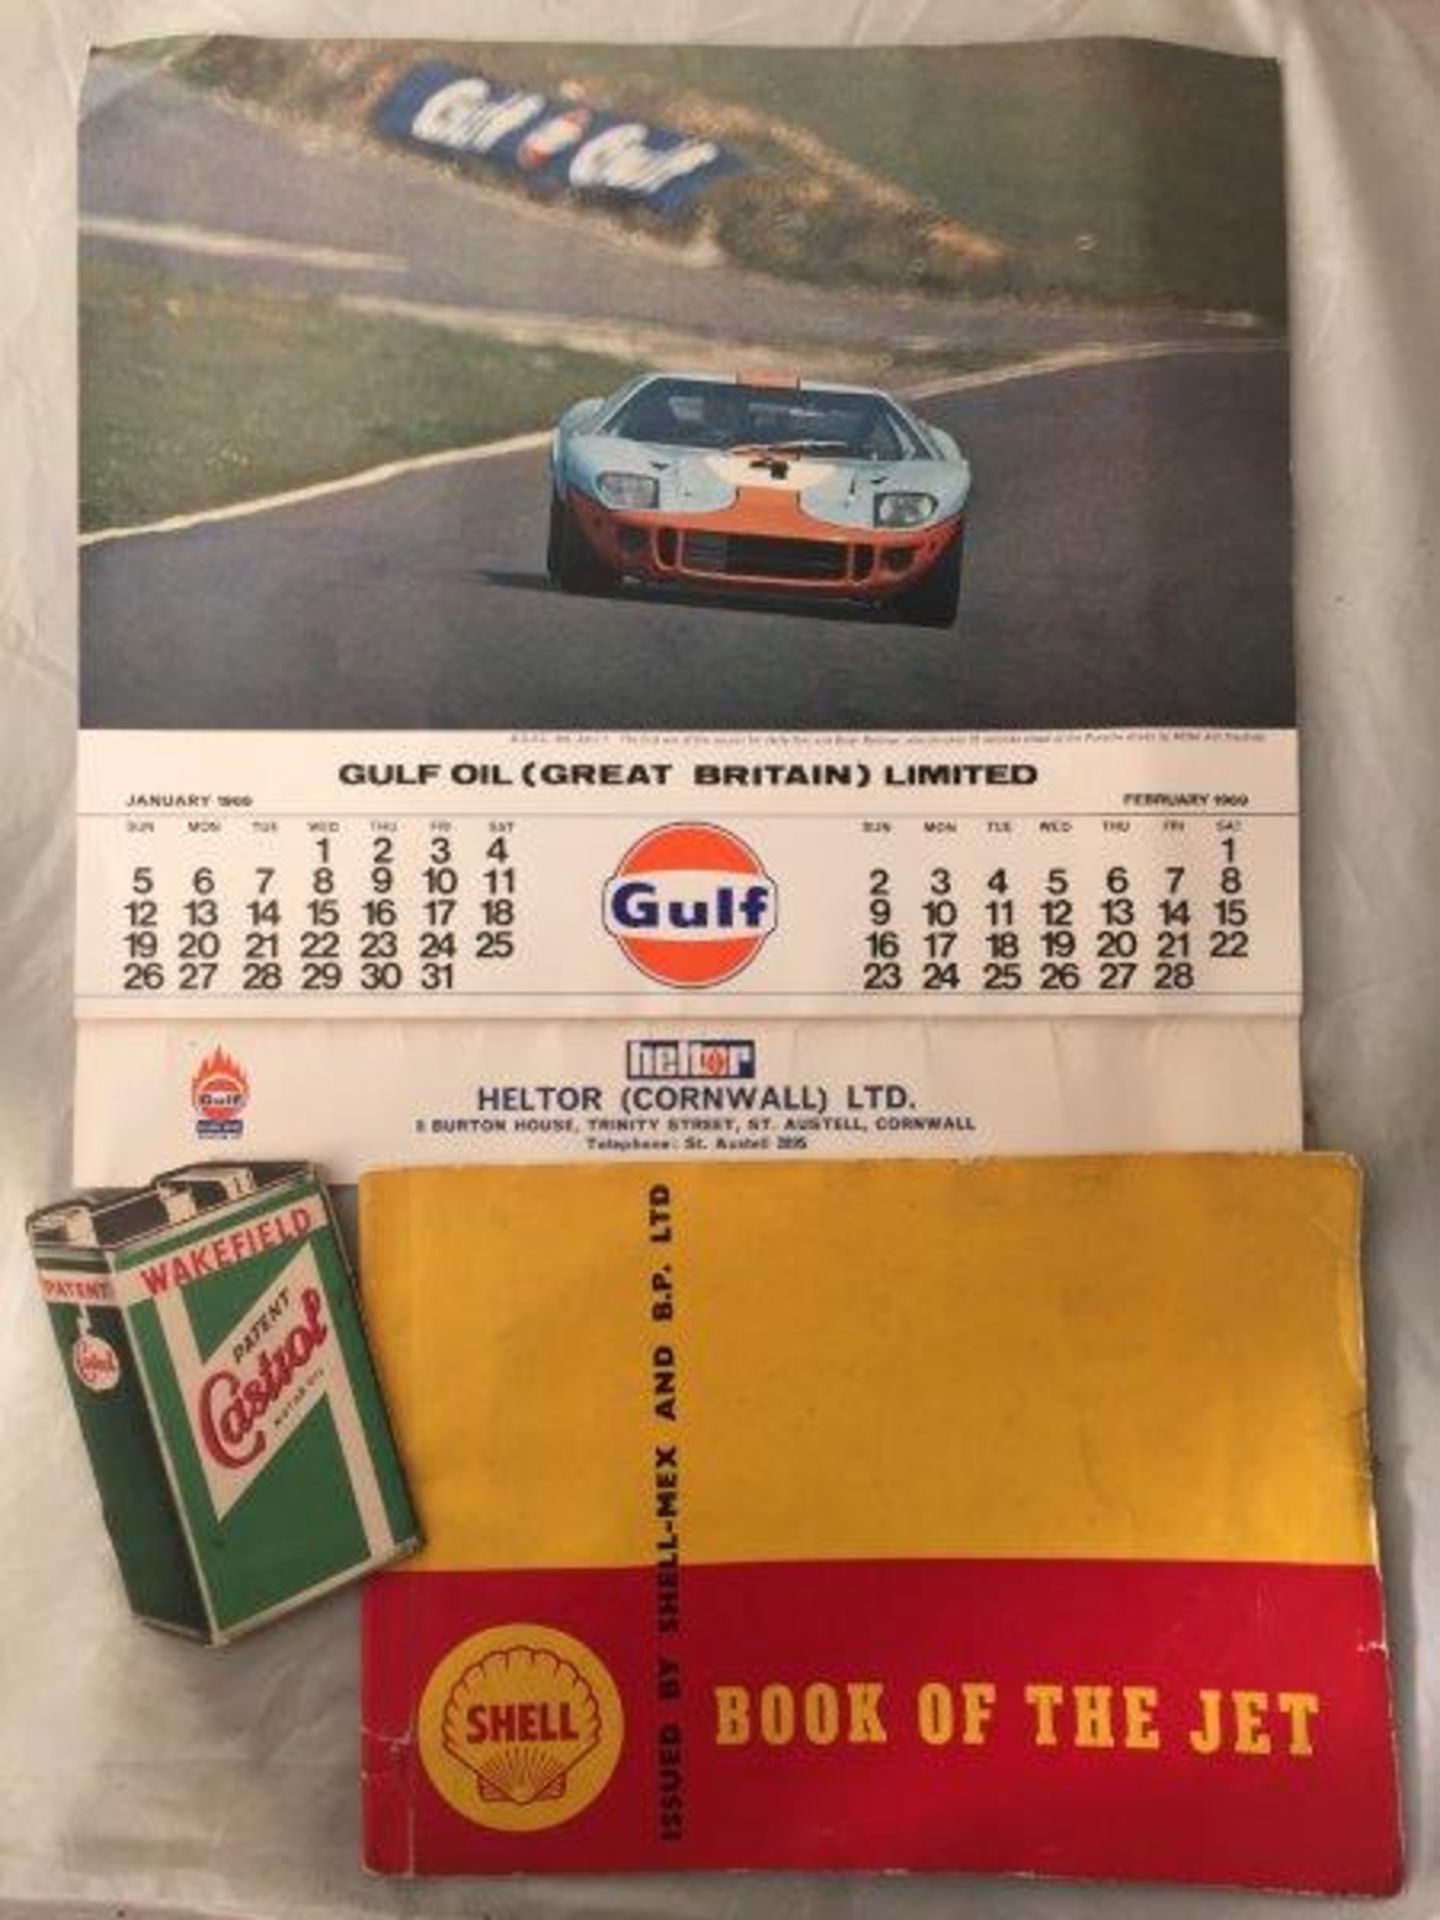 A Gulf Oil (Great Britain) Limited calendar for 1969 featuring the GT40 amongst others, a Shellmex